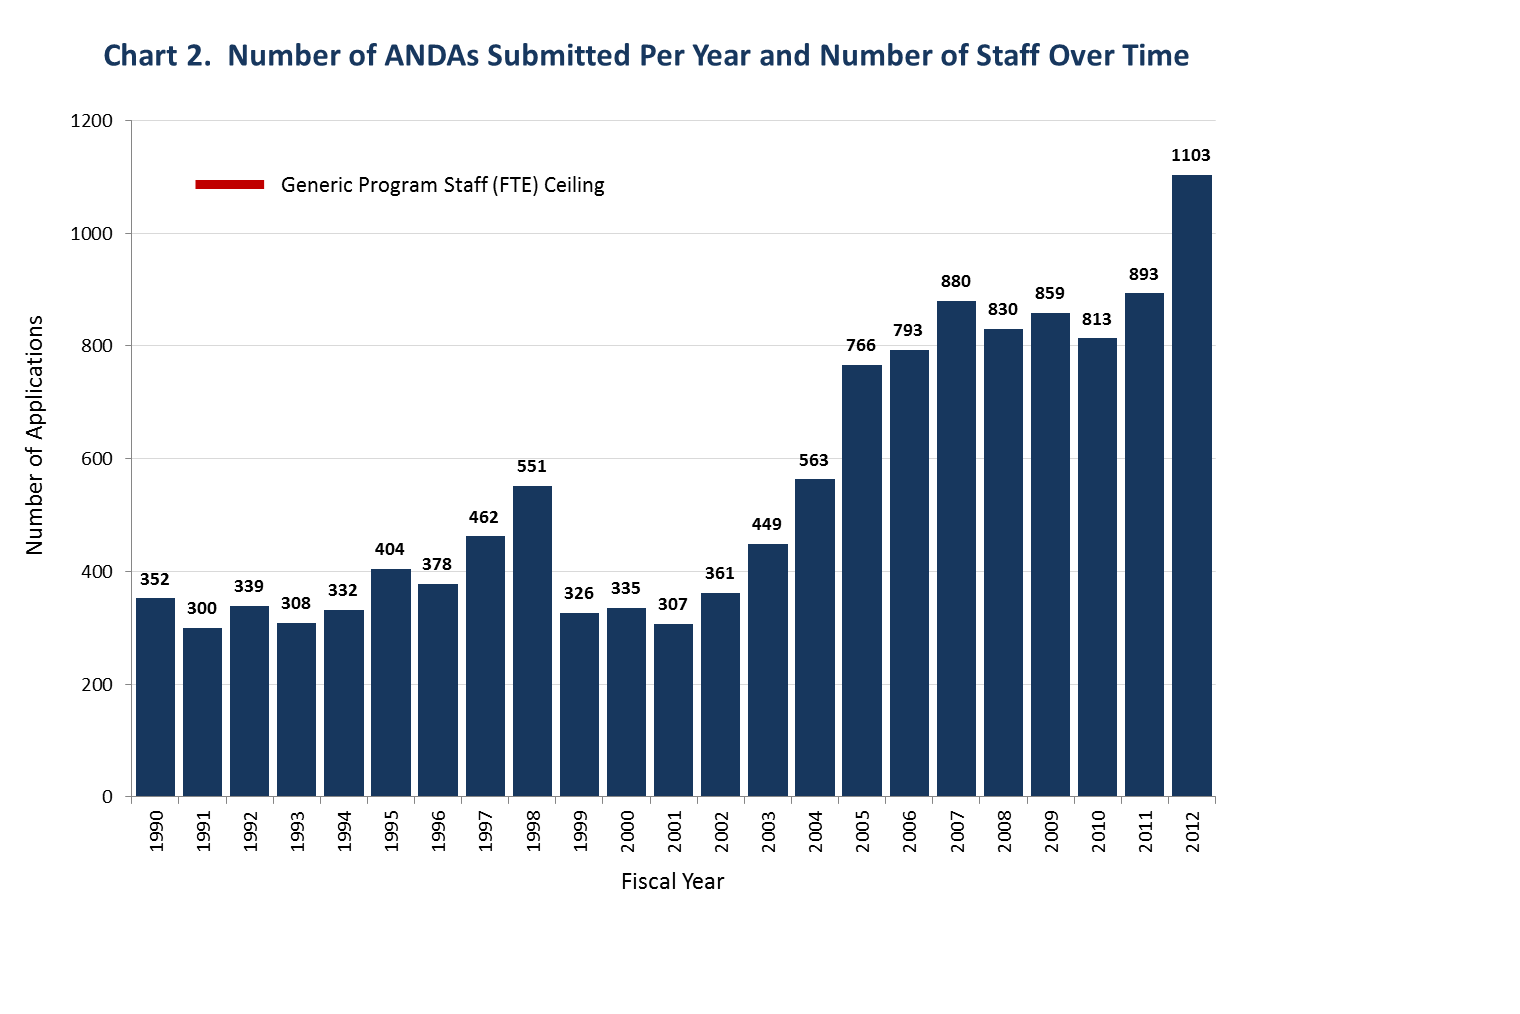 This chart shows that growth in FDA’s staffing did not keep pace with the increase in Abbreviated New Drug Applications submitted to FDA between Fiscal Years 1990 (352 submissions) and 2012 (1,103 submissions).